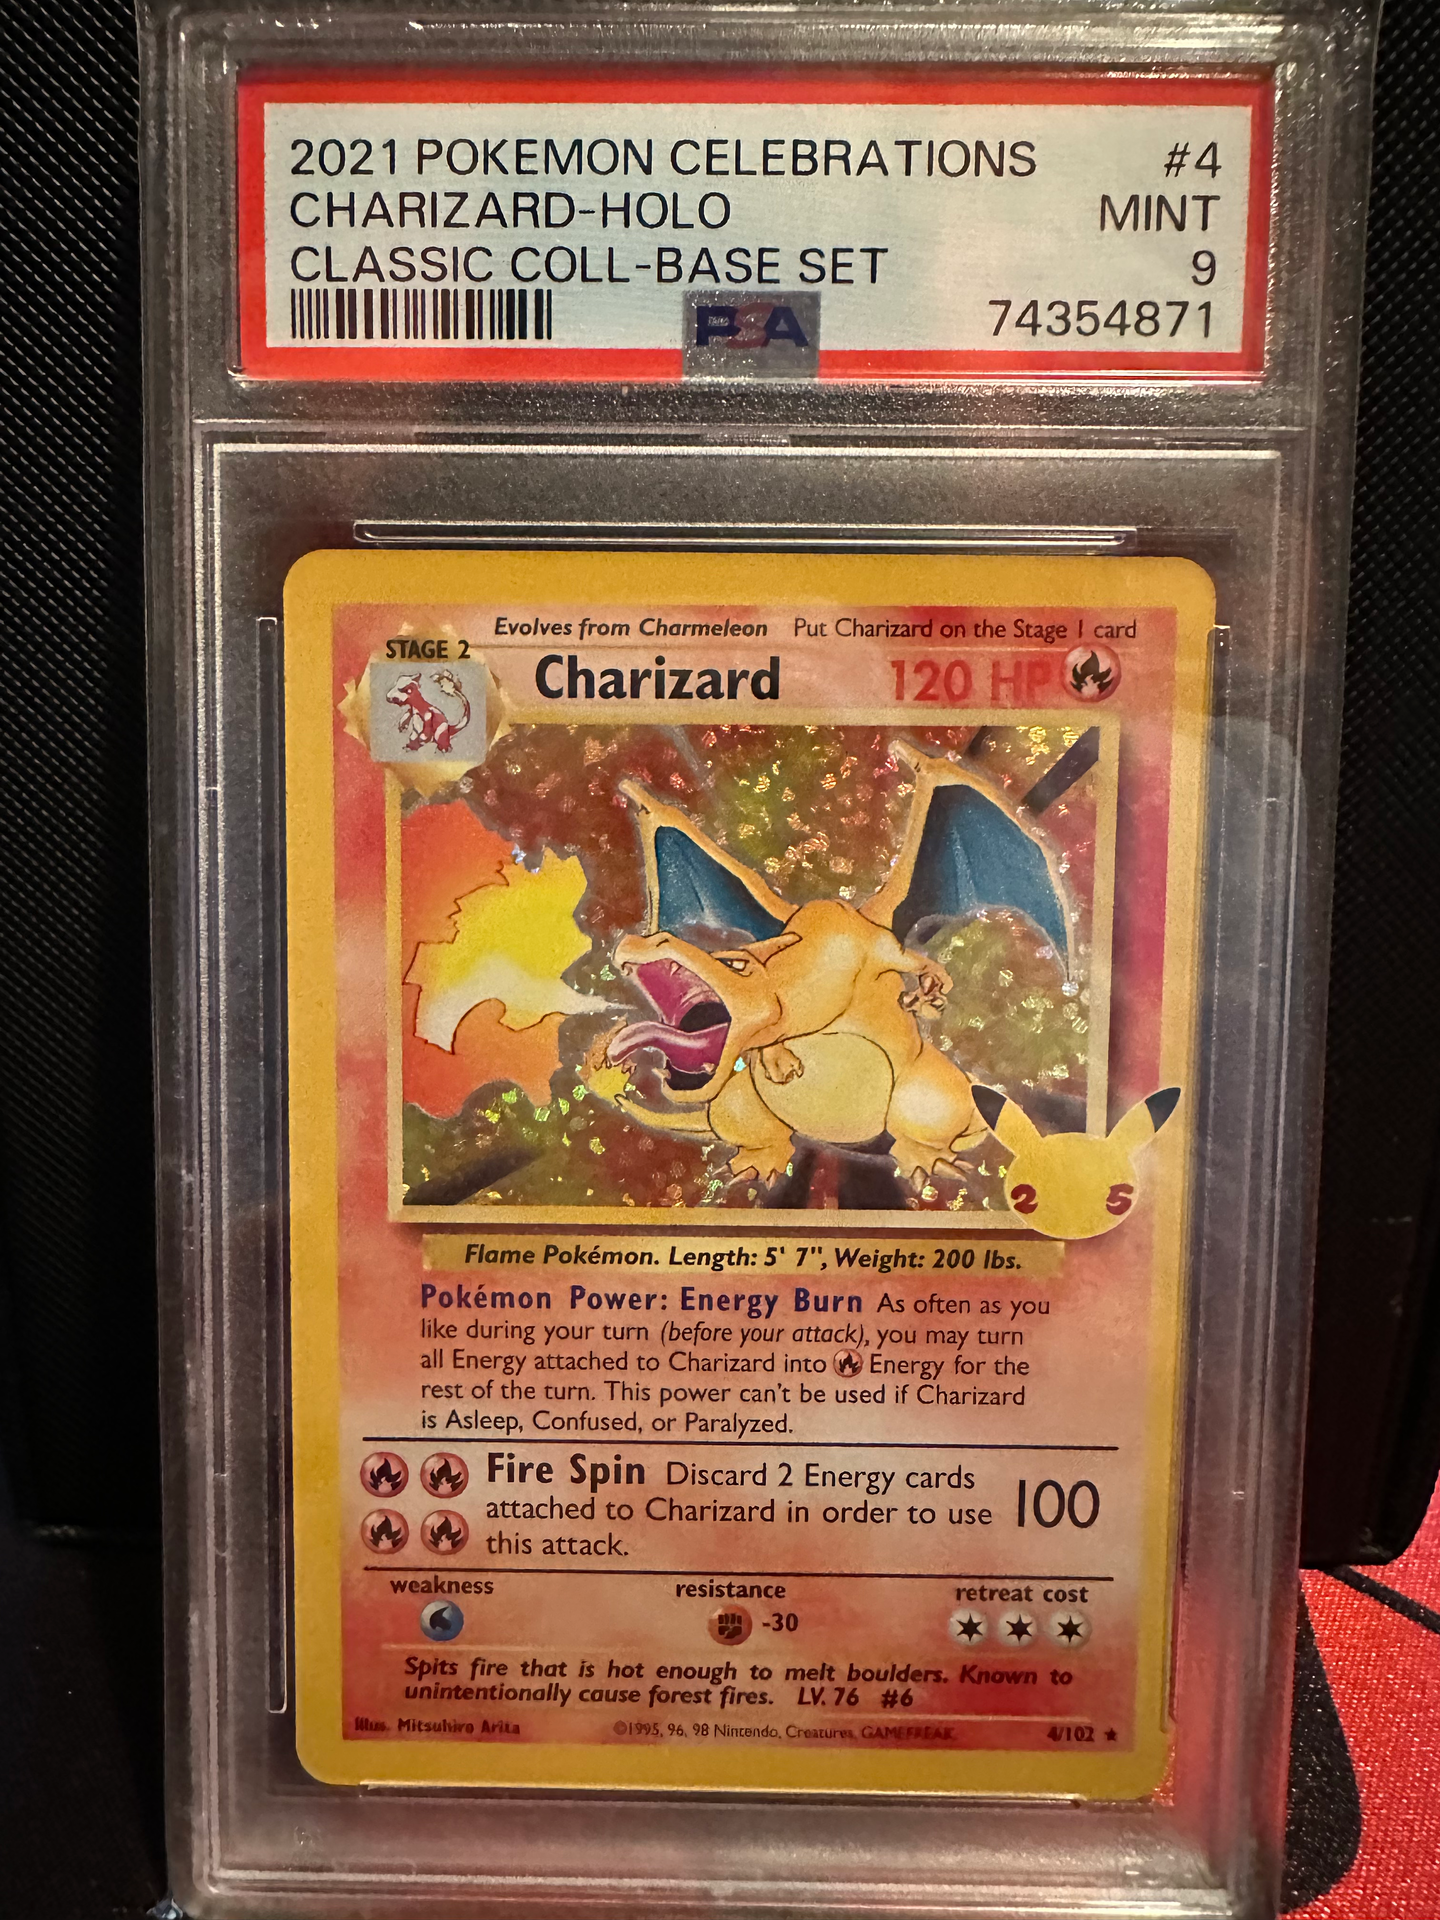 PSA 9 Charizard Classic Collection Holo (Graded Card)